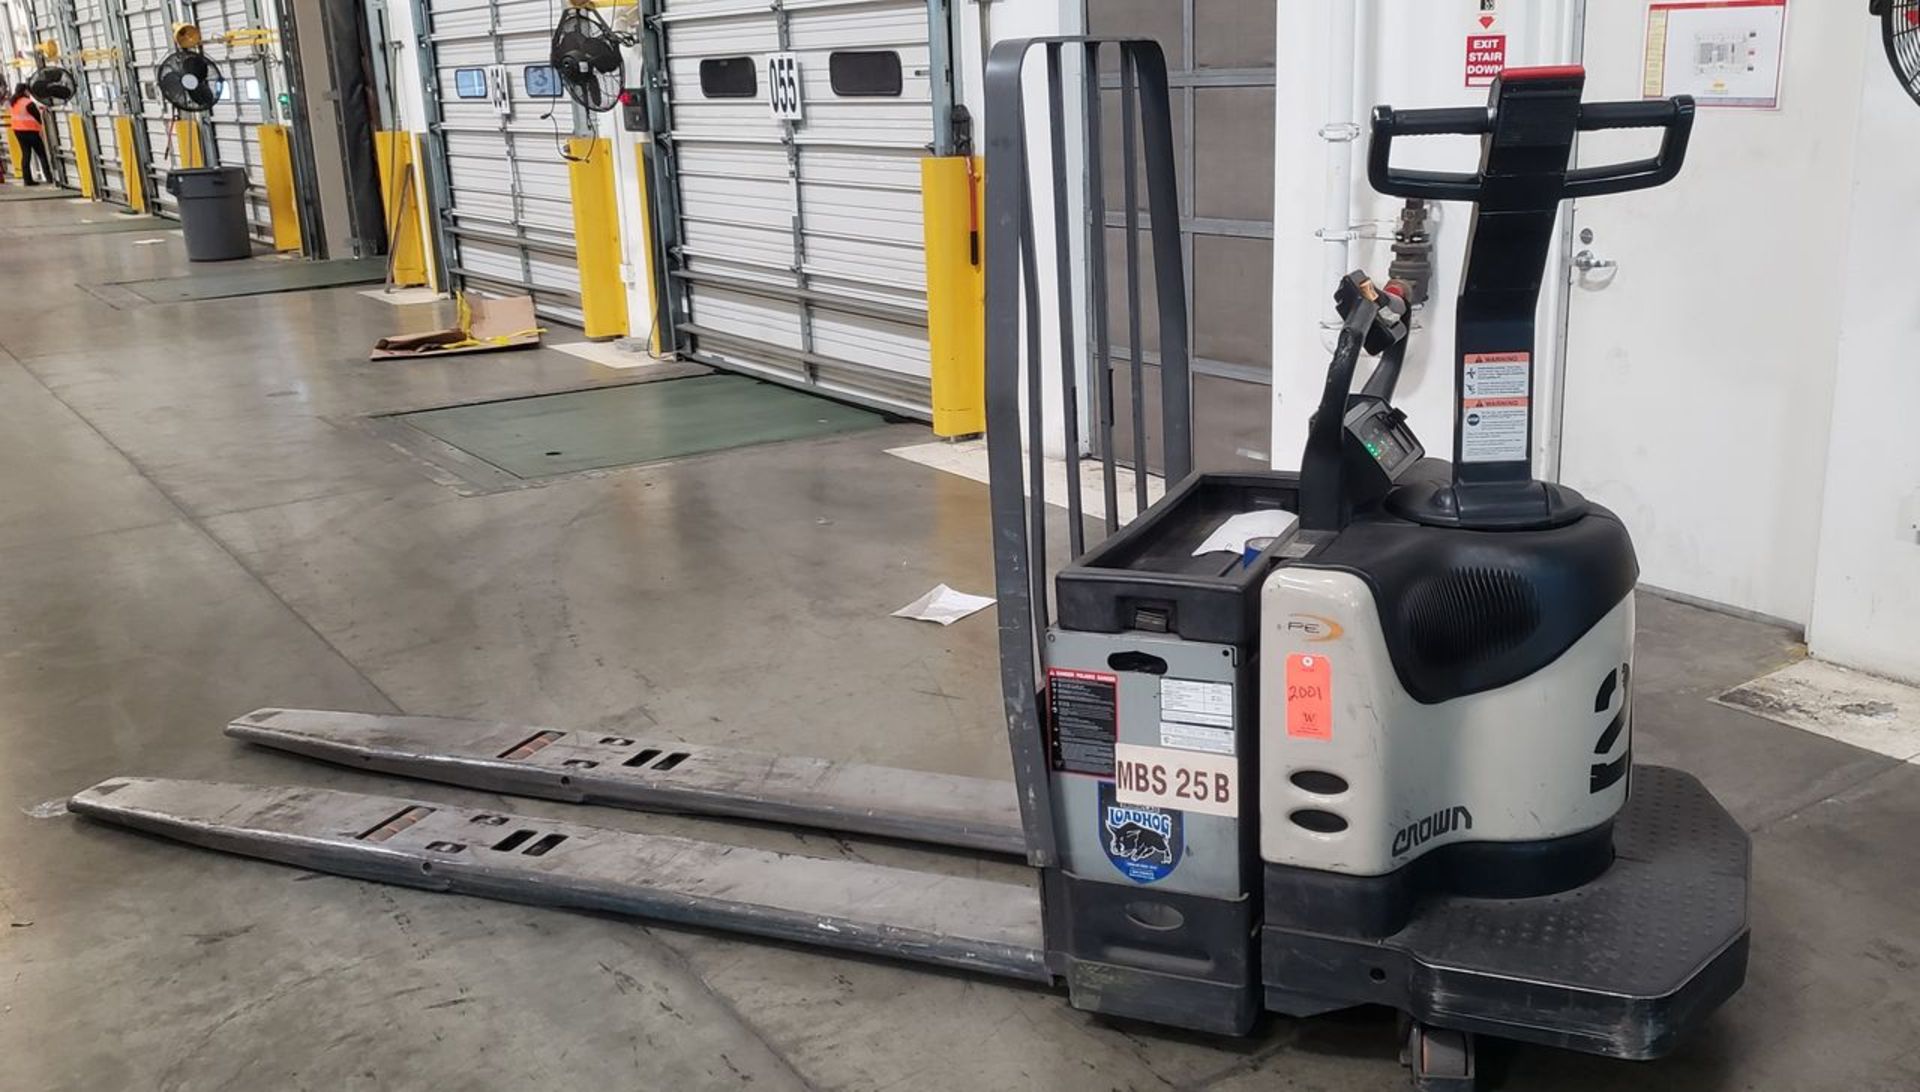 Crown 8,000 lb. Model PE4500-80 Electric Riding Double Pallet Jack, S/N: 6A270517 (2009); with 96